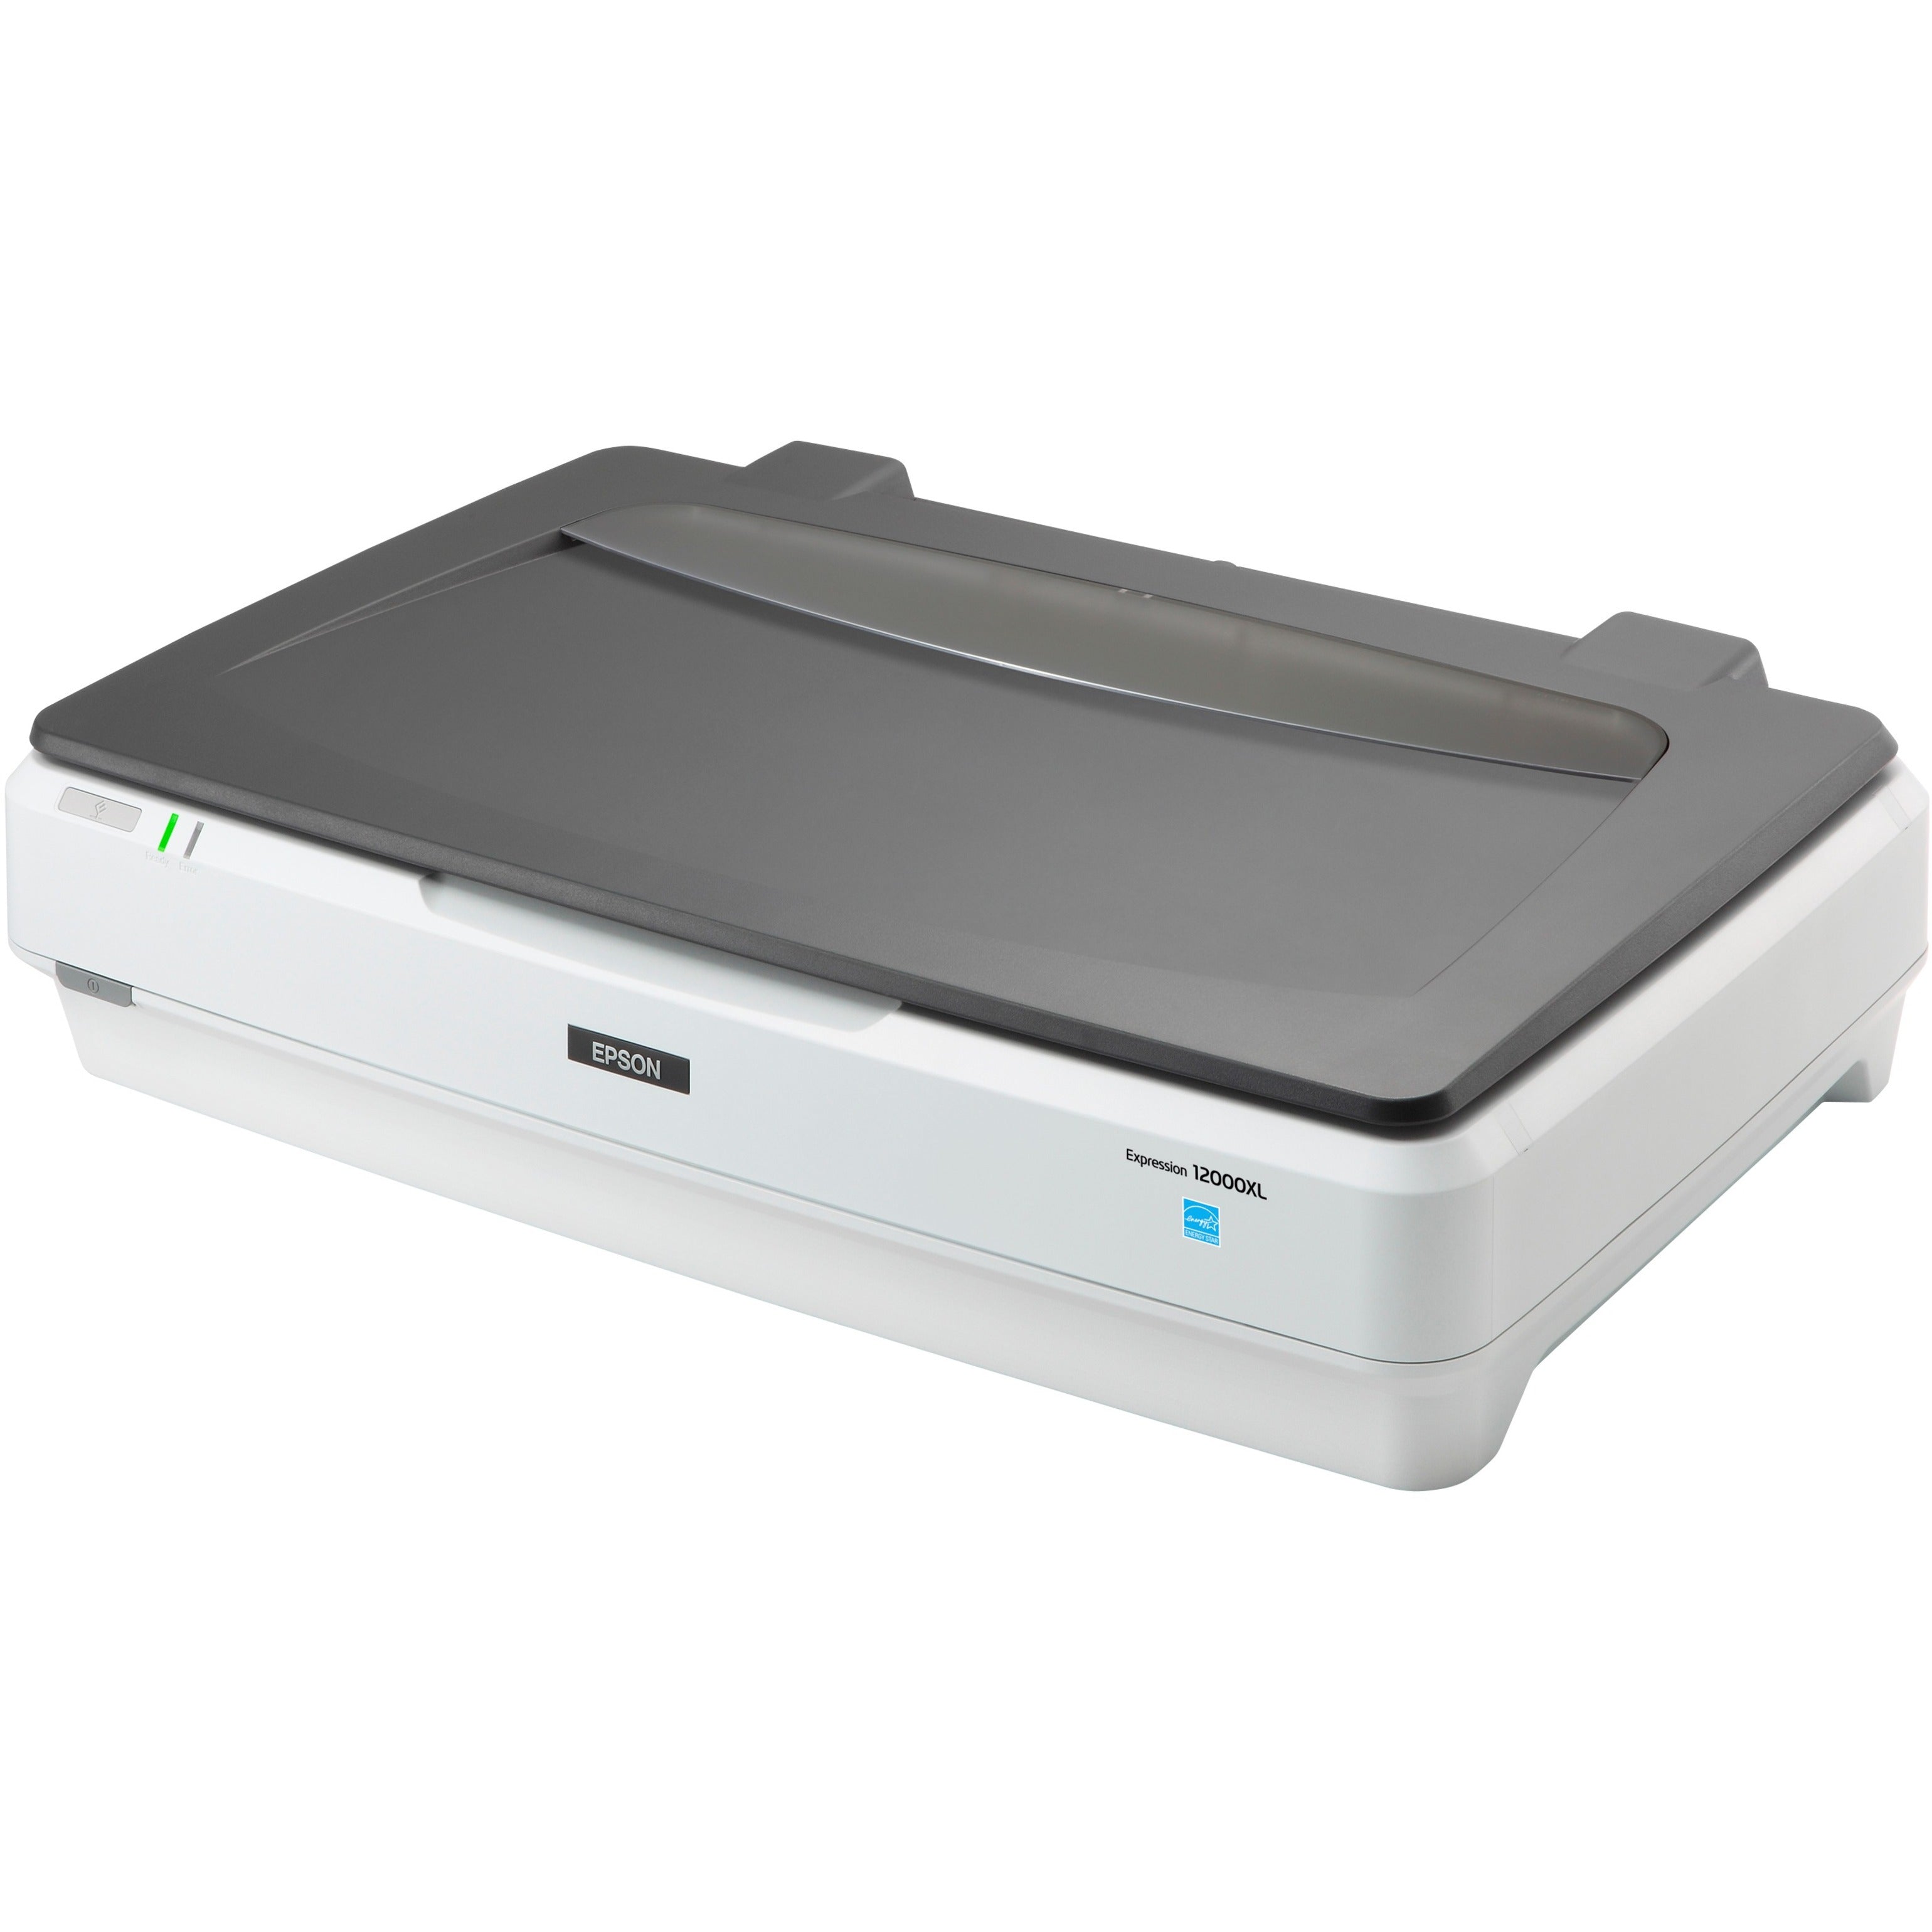 Epson Expression 12000XL-PH Photo Scanner - High Resolution Flatbed Scanner [Discontinued]